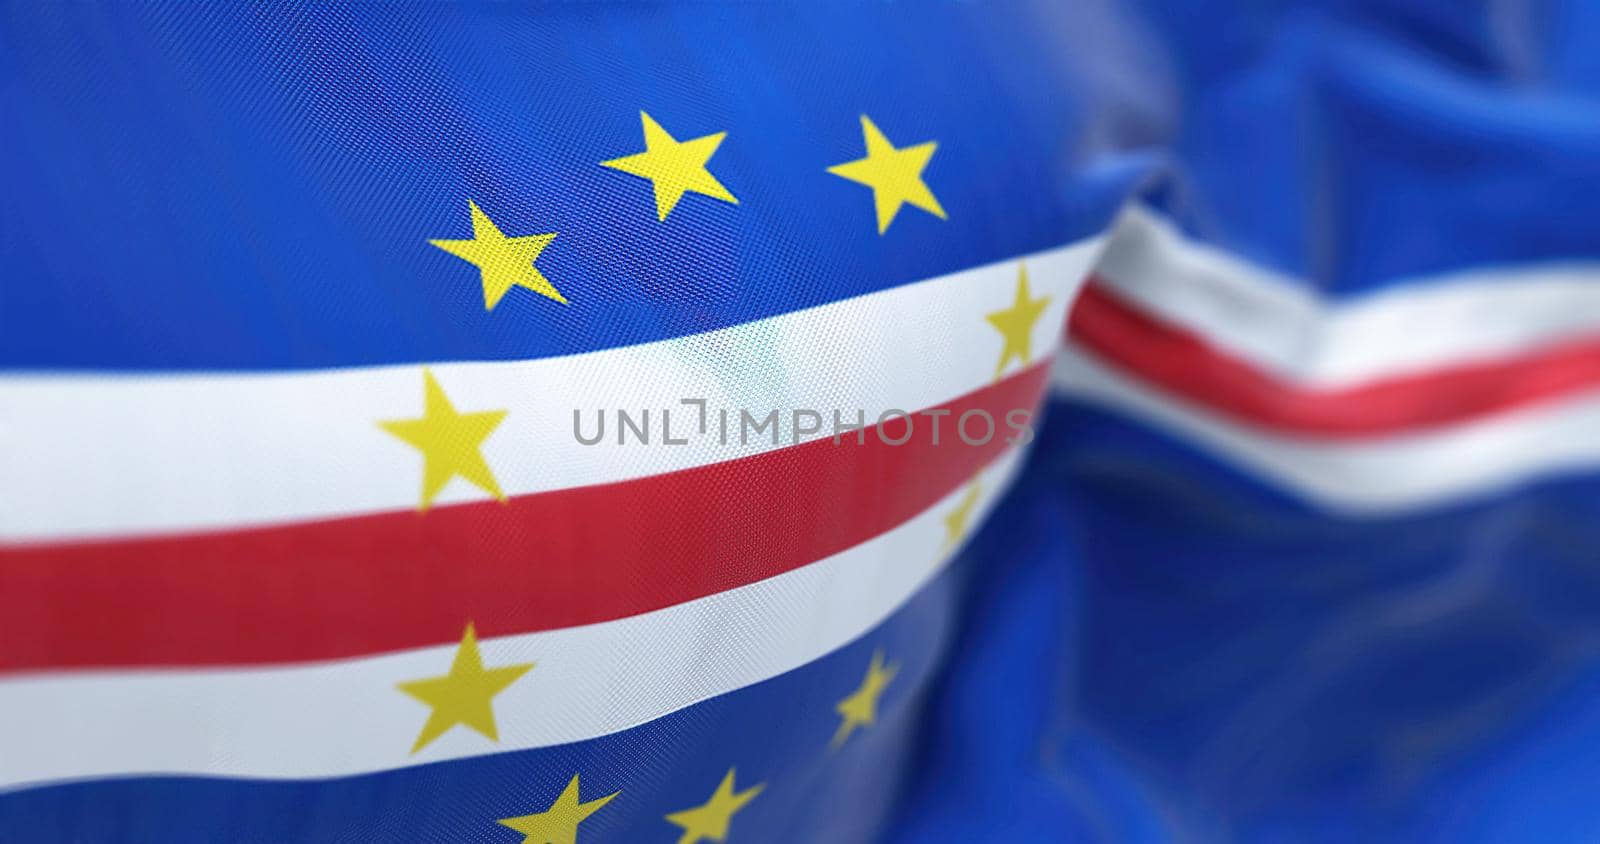 Close-up view of the Cape Verde national flag waving in the wind. The Republic of Cabo Verde, is an island country in the central Atlantic Ocean. Fabric textured background. Selective focus